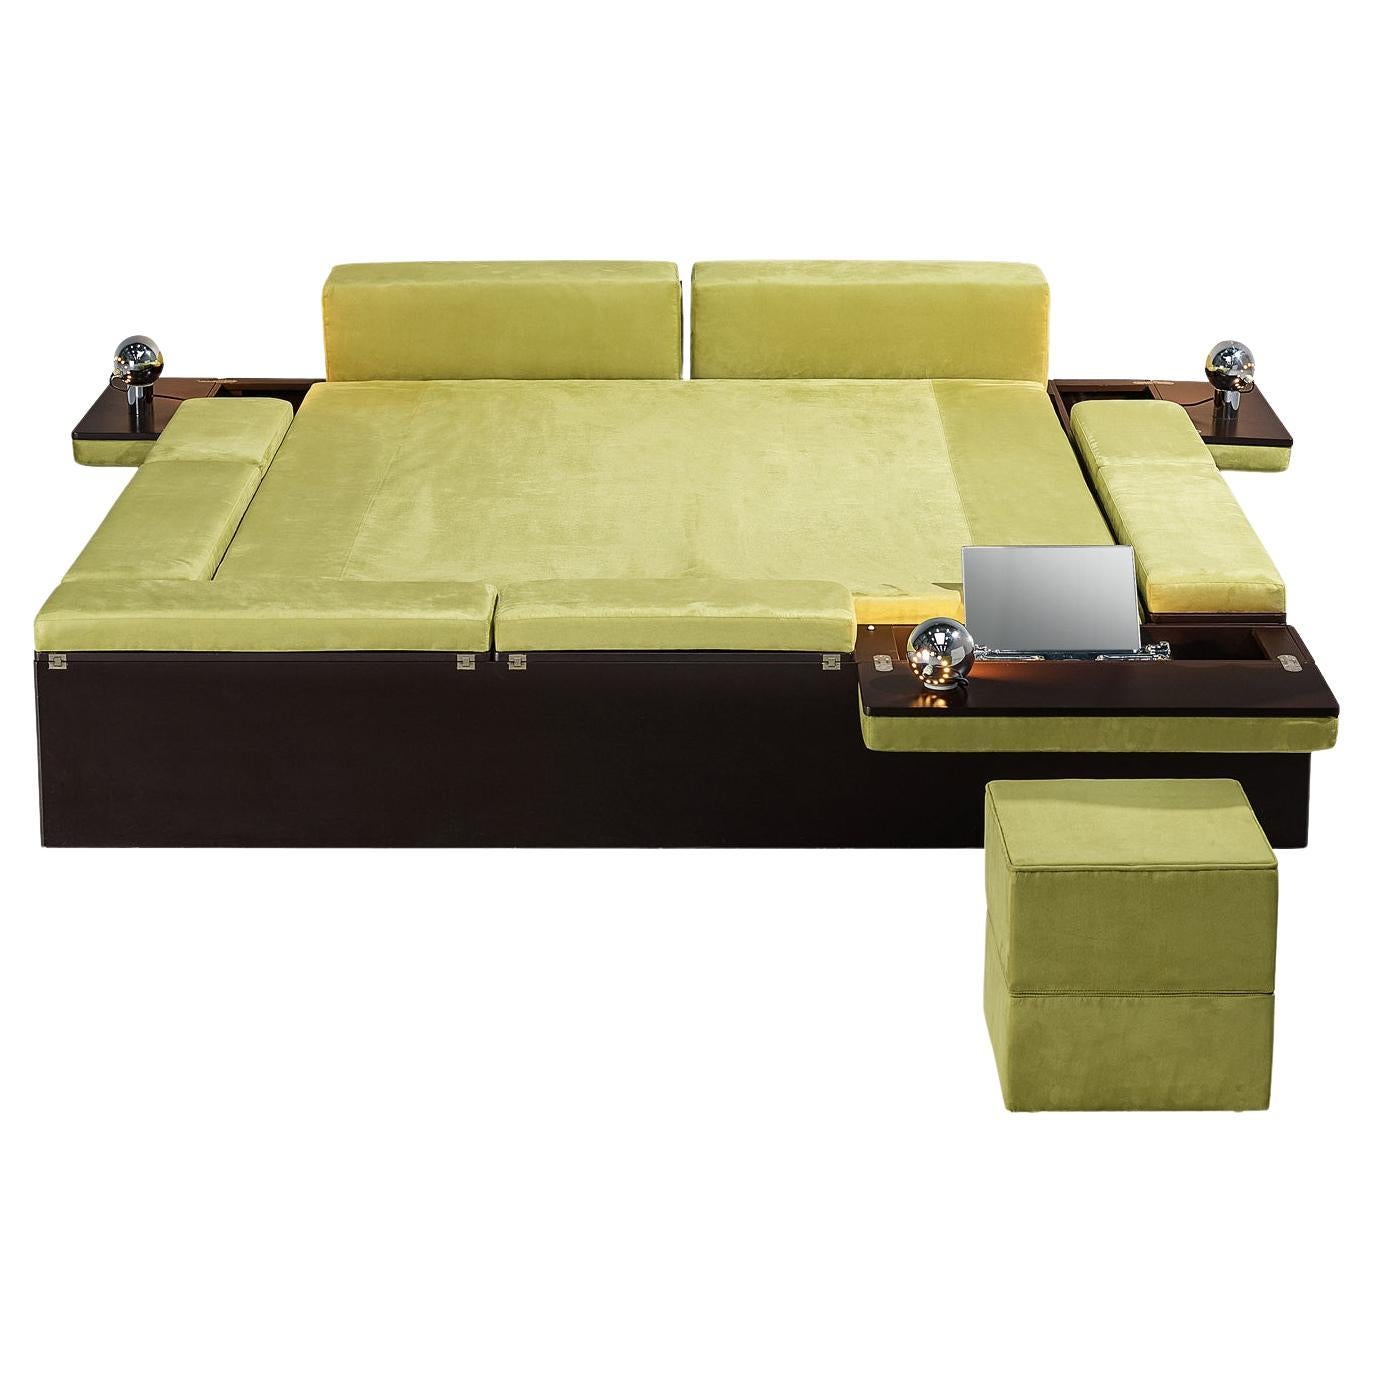 Luciano Bertoncini for Cjfra 'Zattera' Bed in Alcantara and Lacquered Wood  For Sale